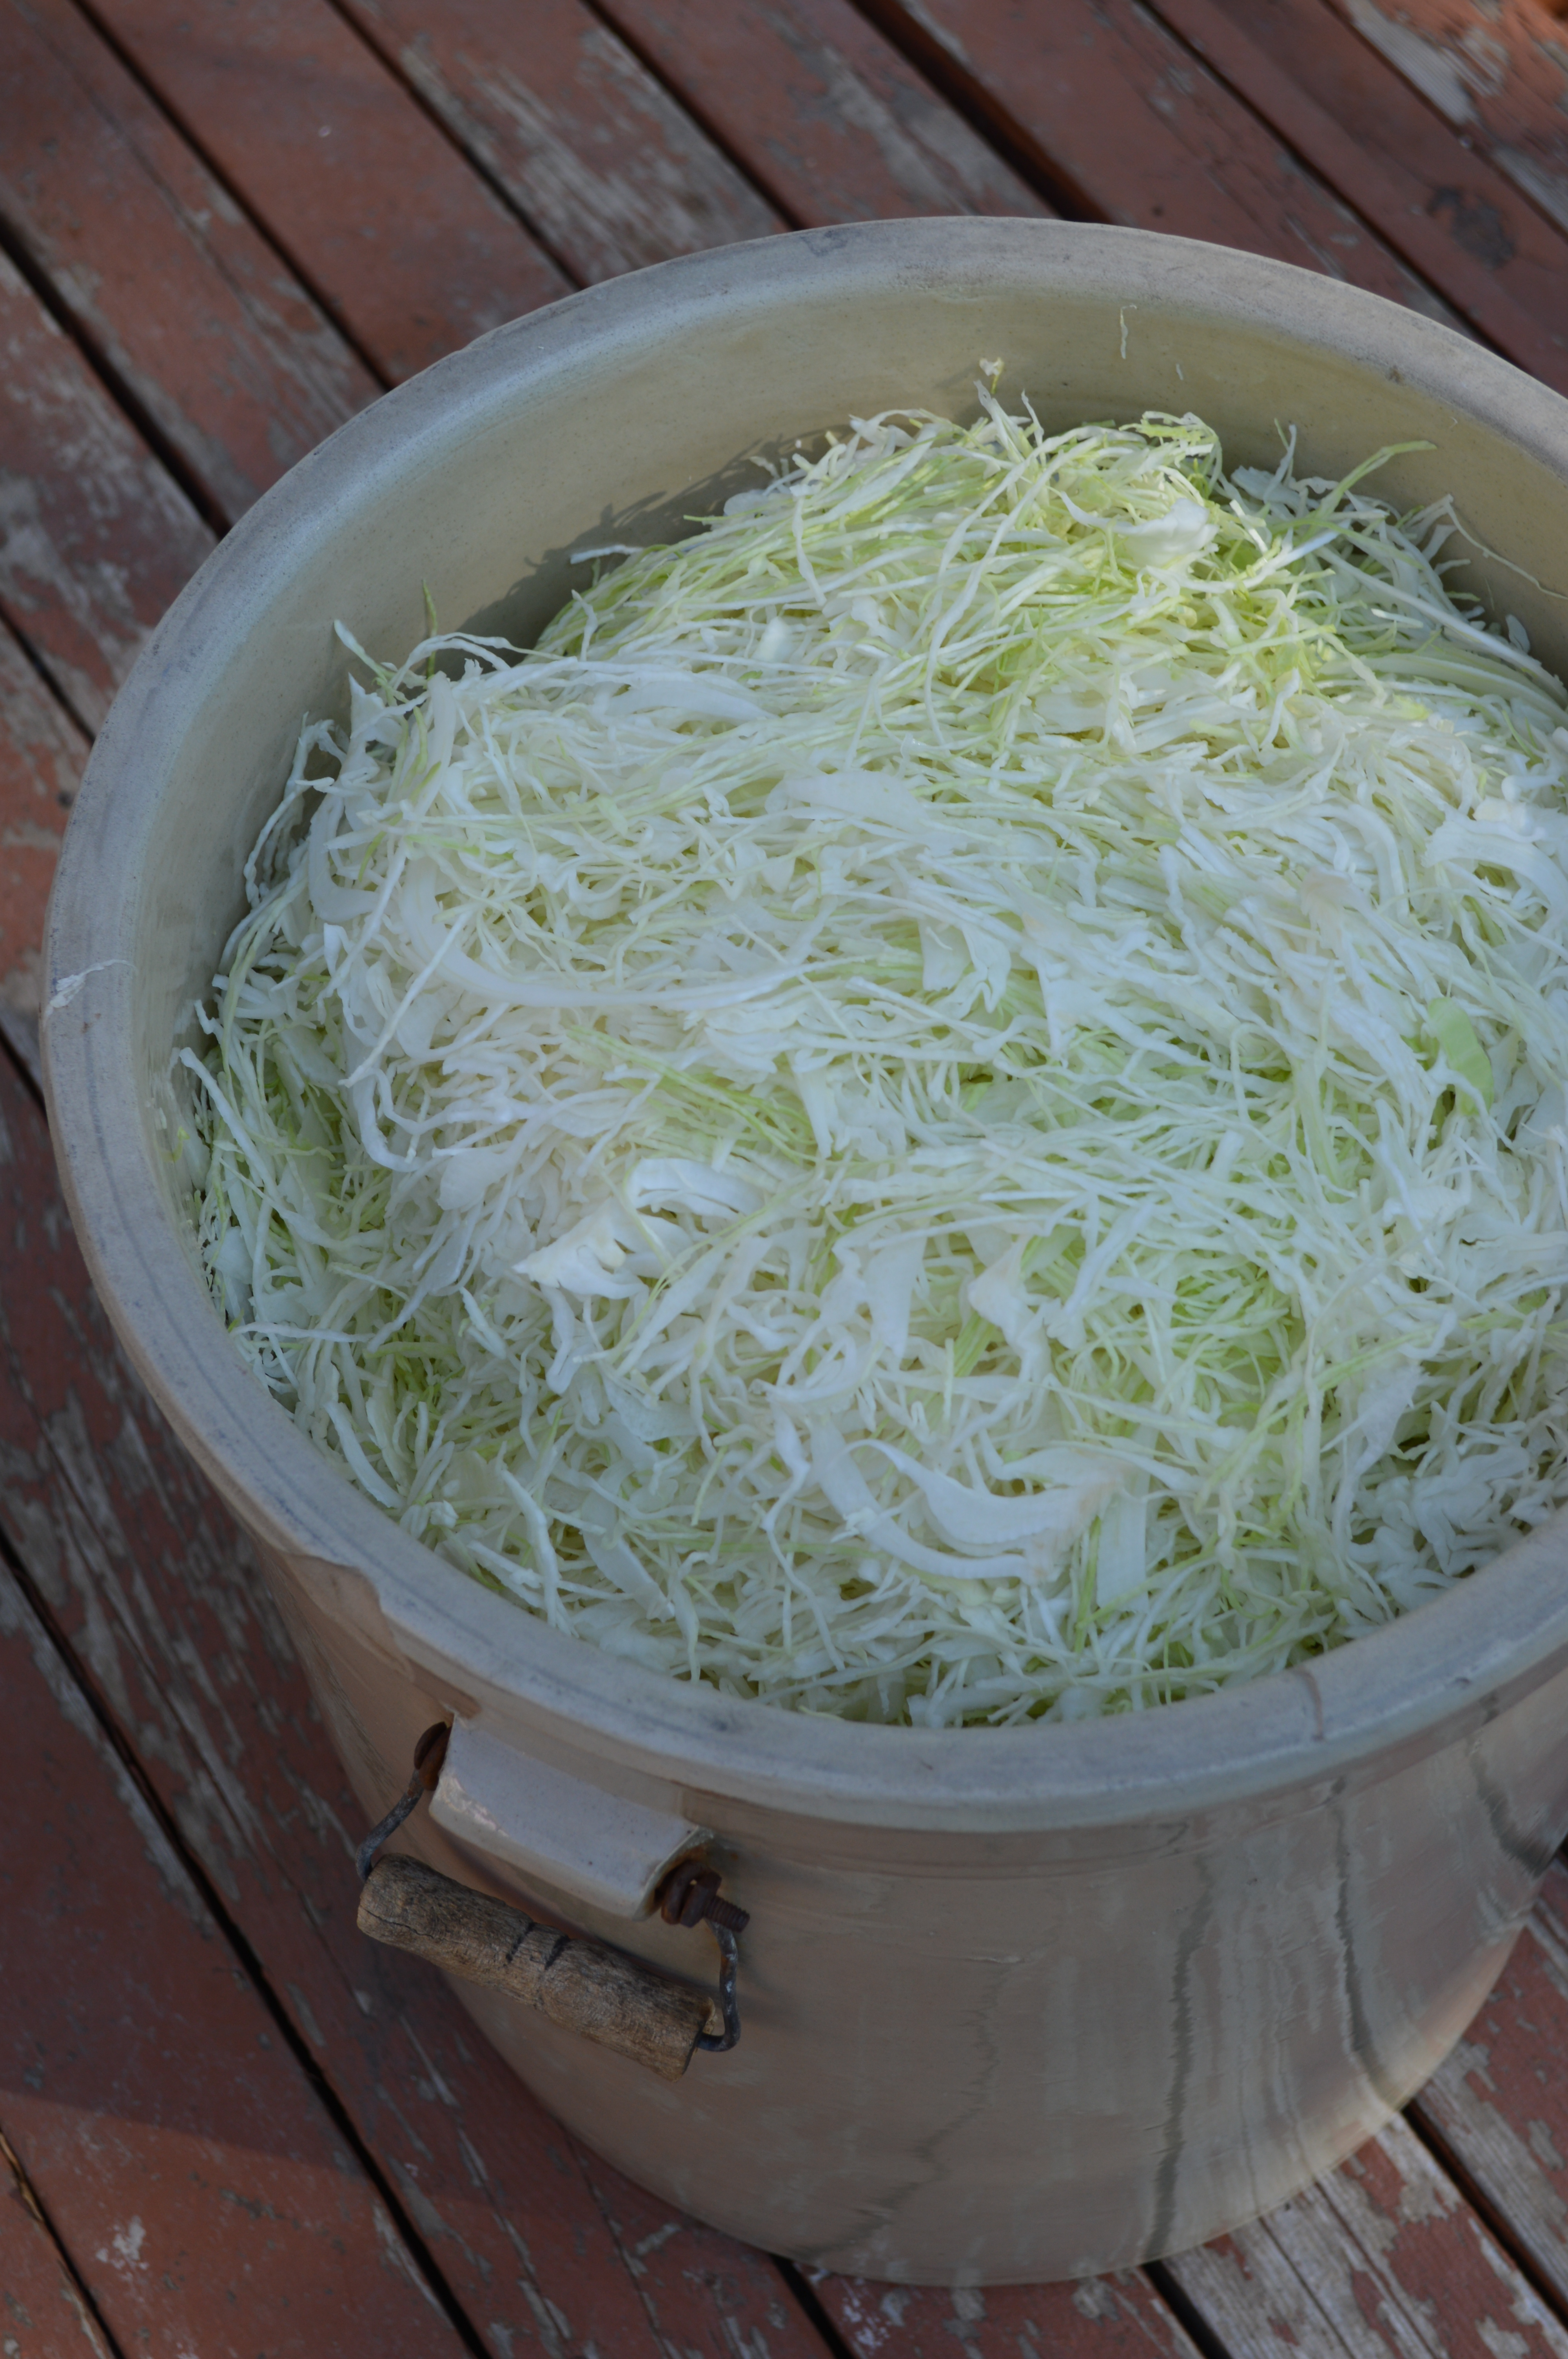 The freshly sliced cabbage, about to be mixed with salt